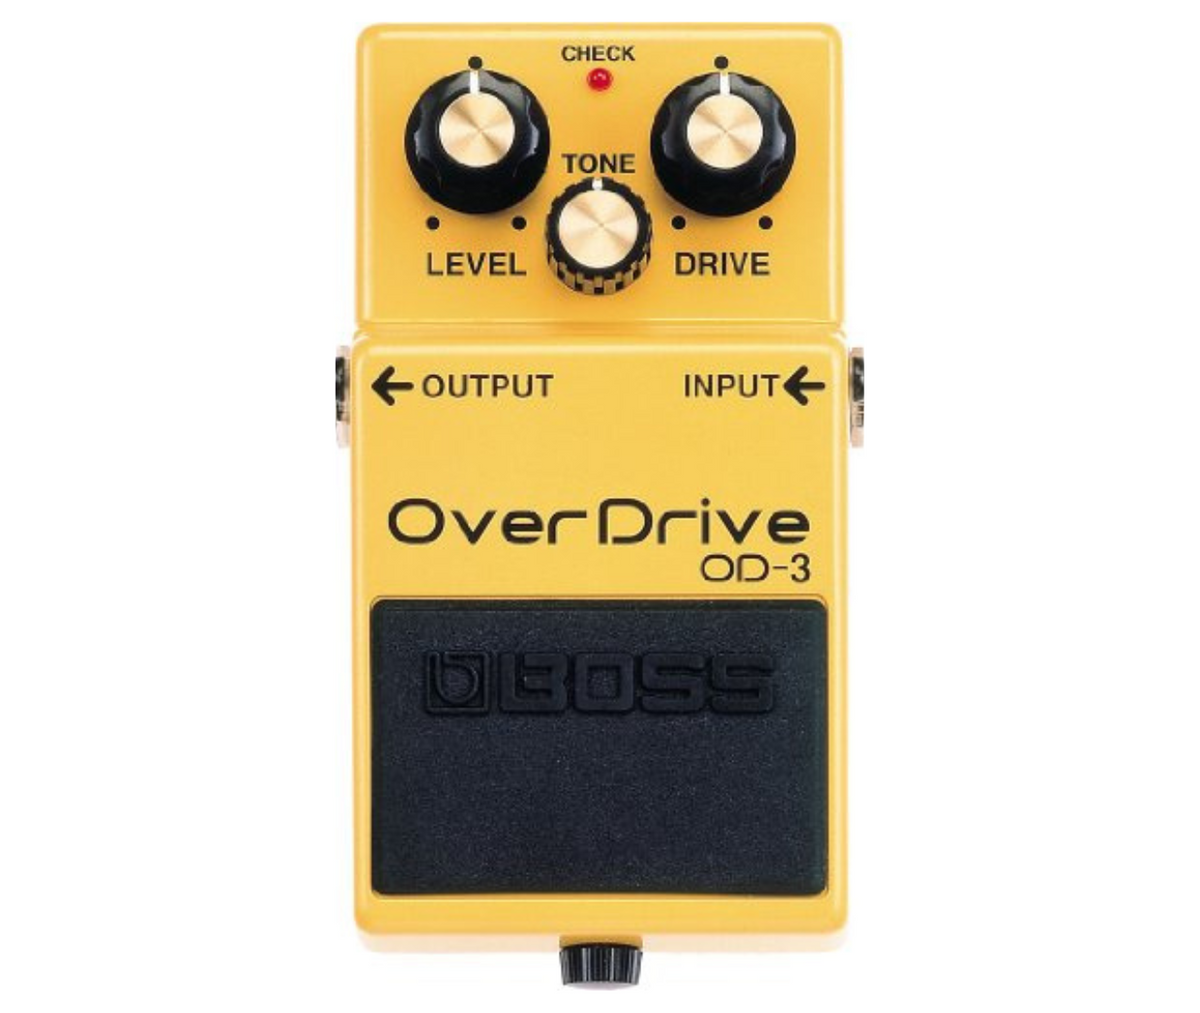 BOSS OD-3 OverDrive Best Guitar Effects Pedal Sustain and Compression Dual-Stage Overdrive for Blues and Rock